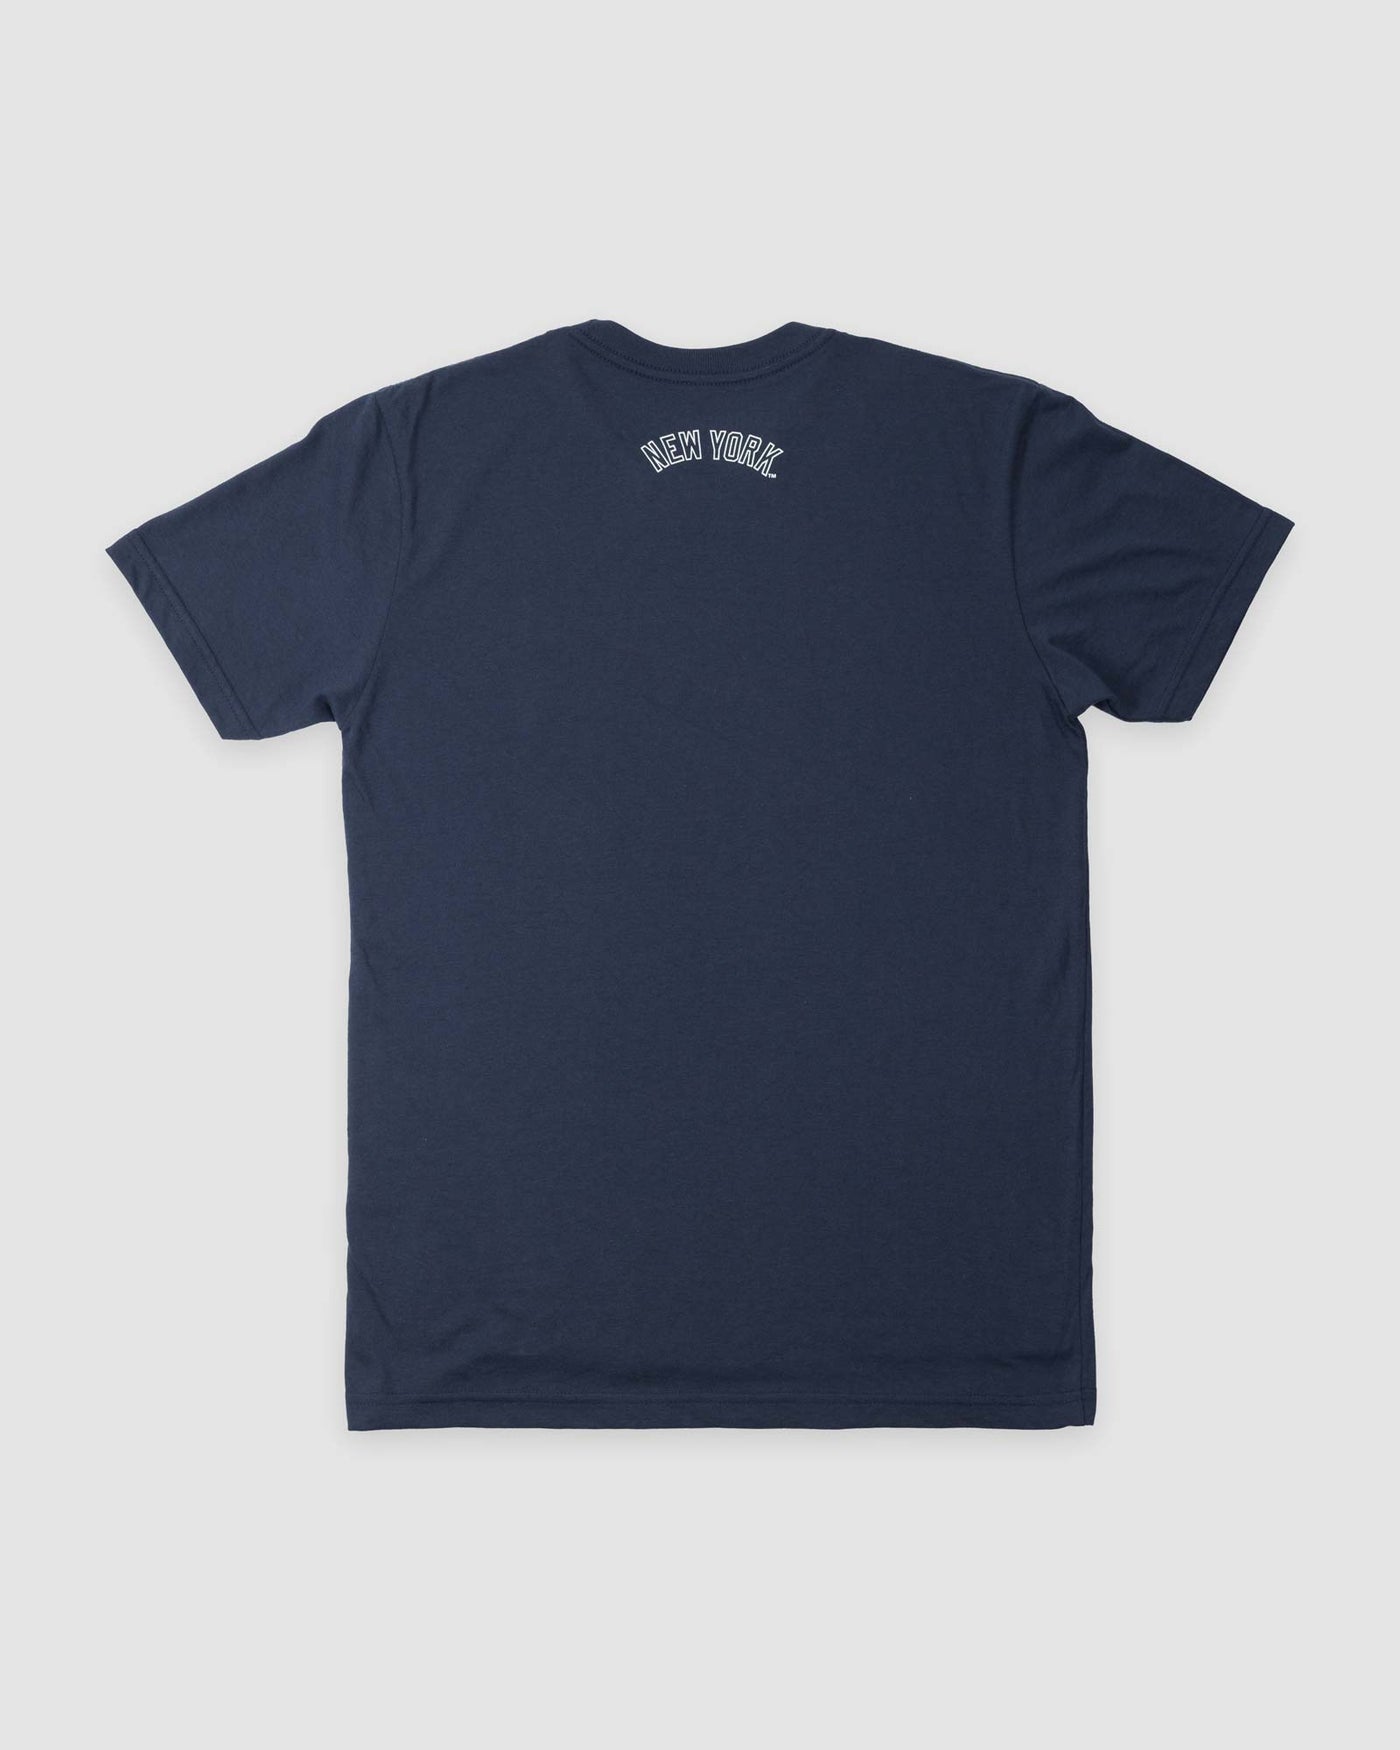 Outfield Fence Tee - New York Yankees